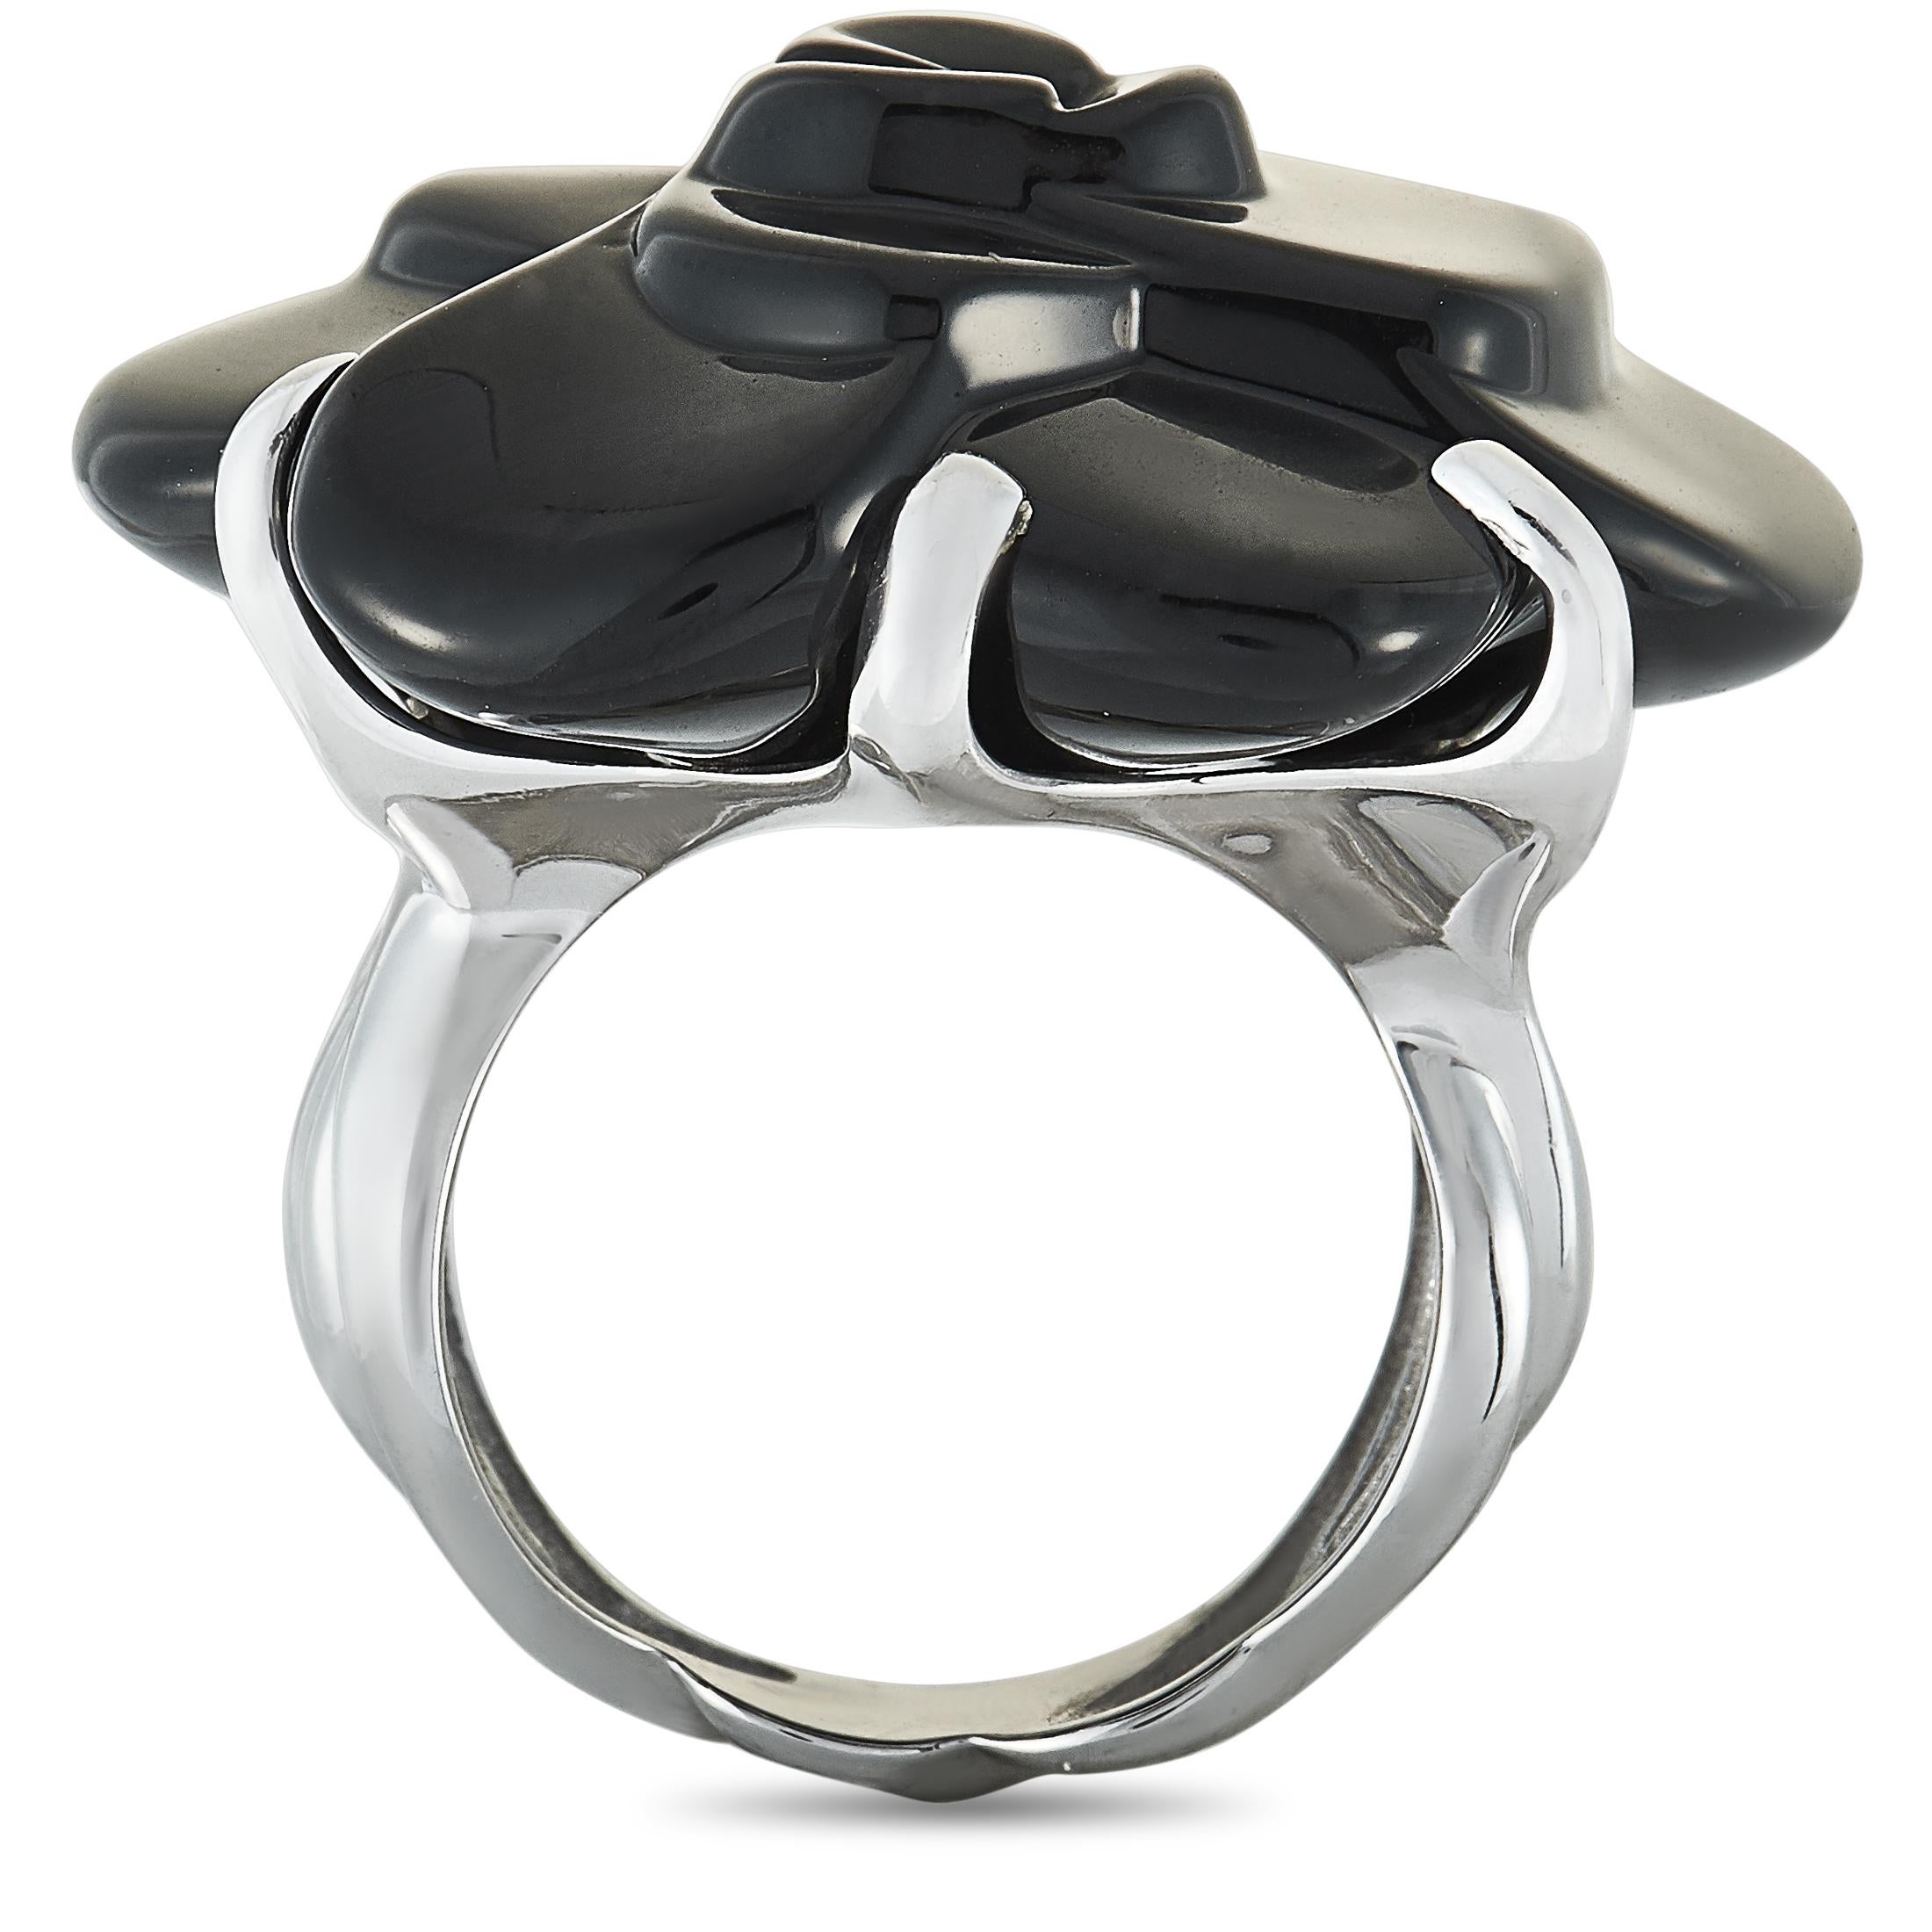 The Chanel “Camélia” ring is crafted from 18K white gold and set with an onyx. The ring weighs 21.6 grams, boasting band thickness of 7 mm and top height of 13 mm, while top dimensions measure 30 by 30 mm.

This jewelry piece is offered in estate